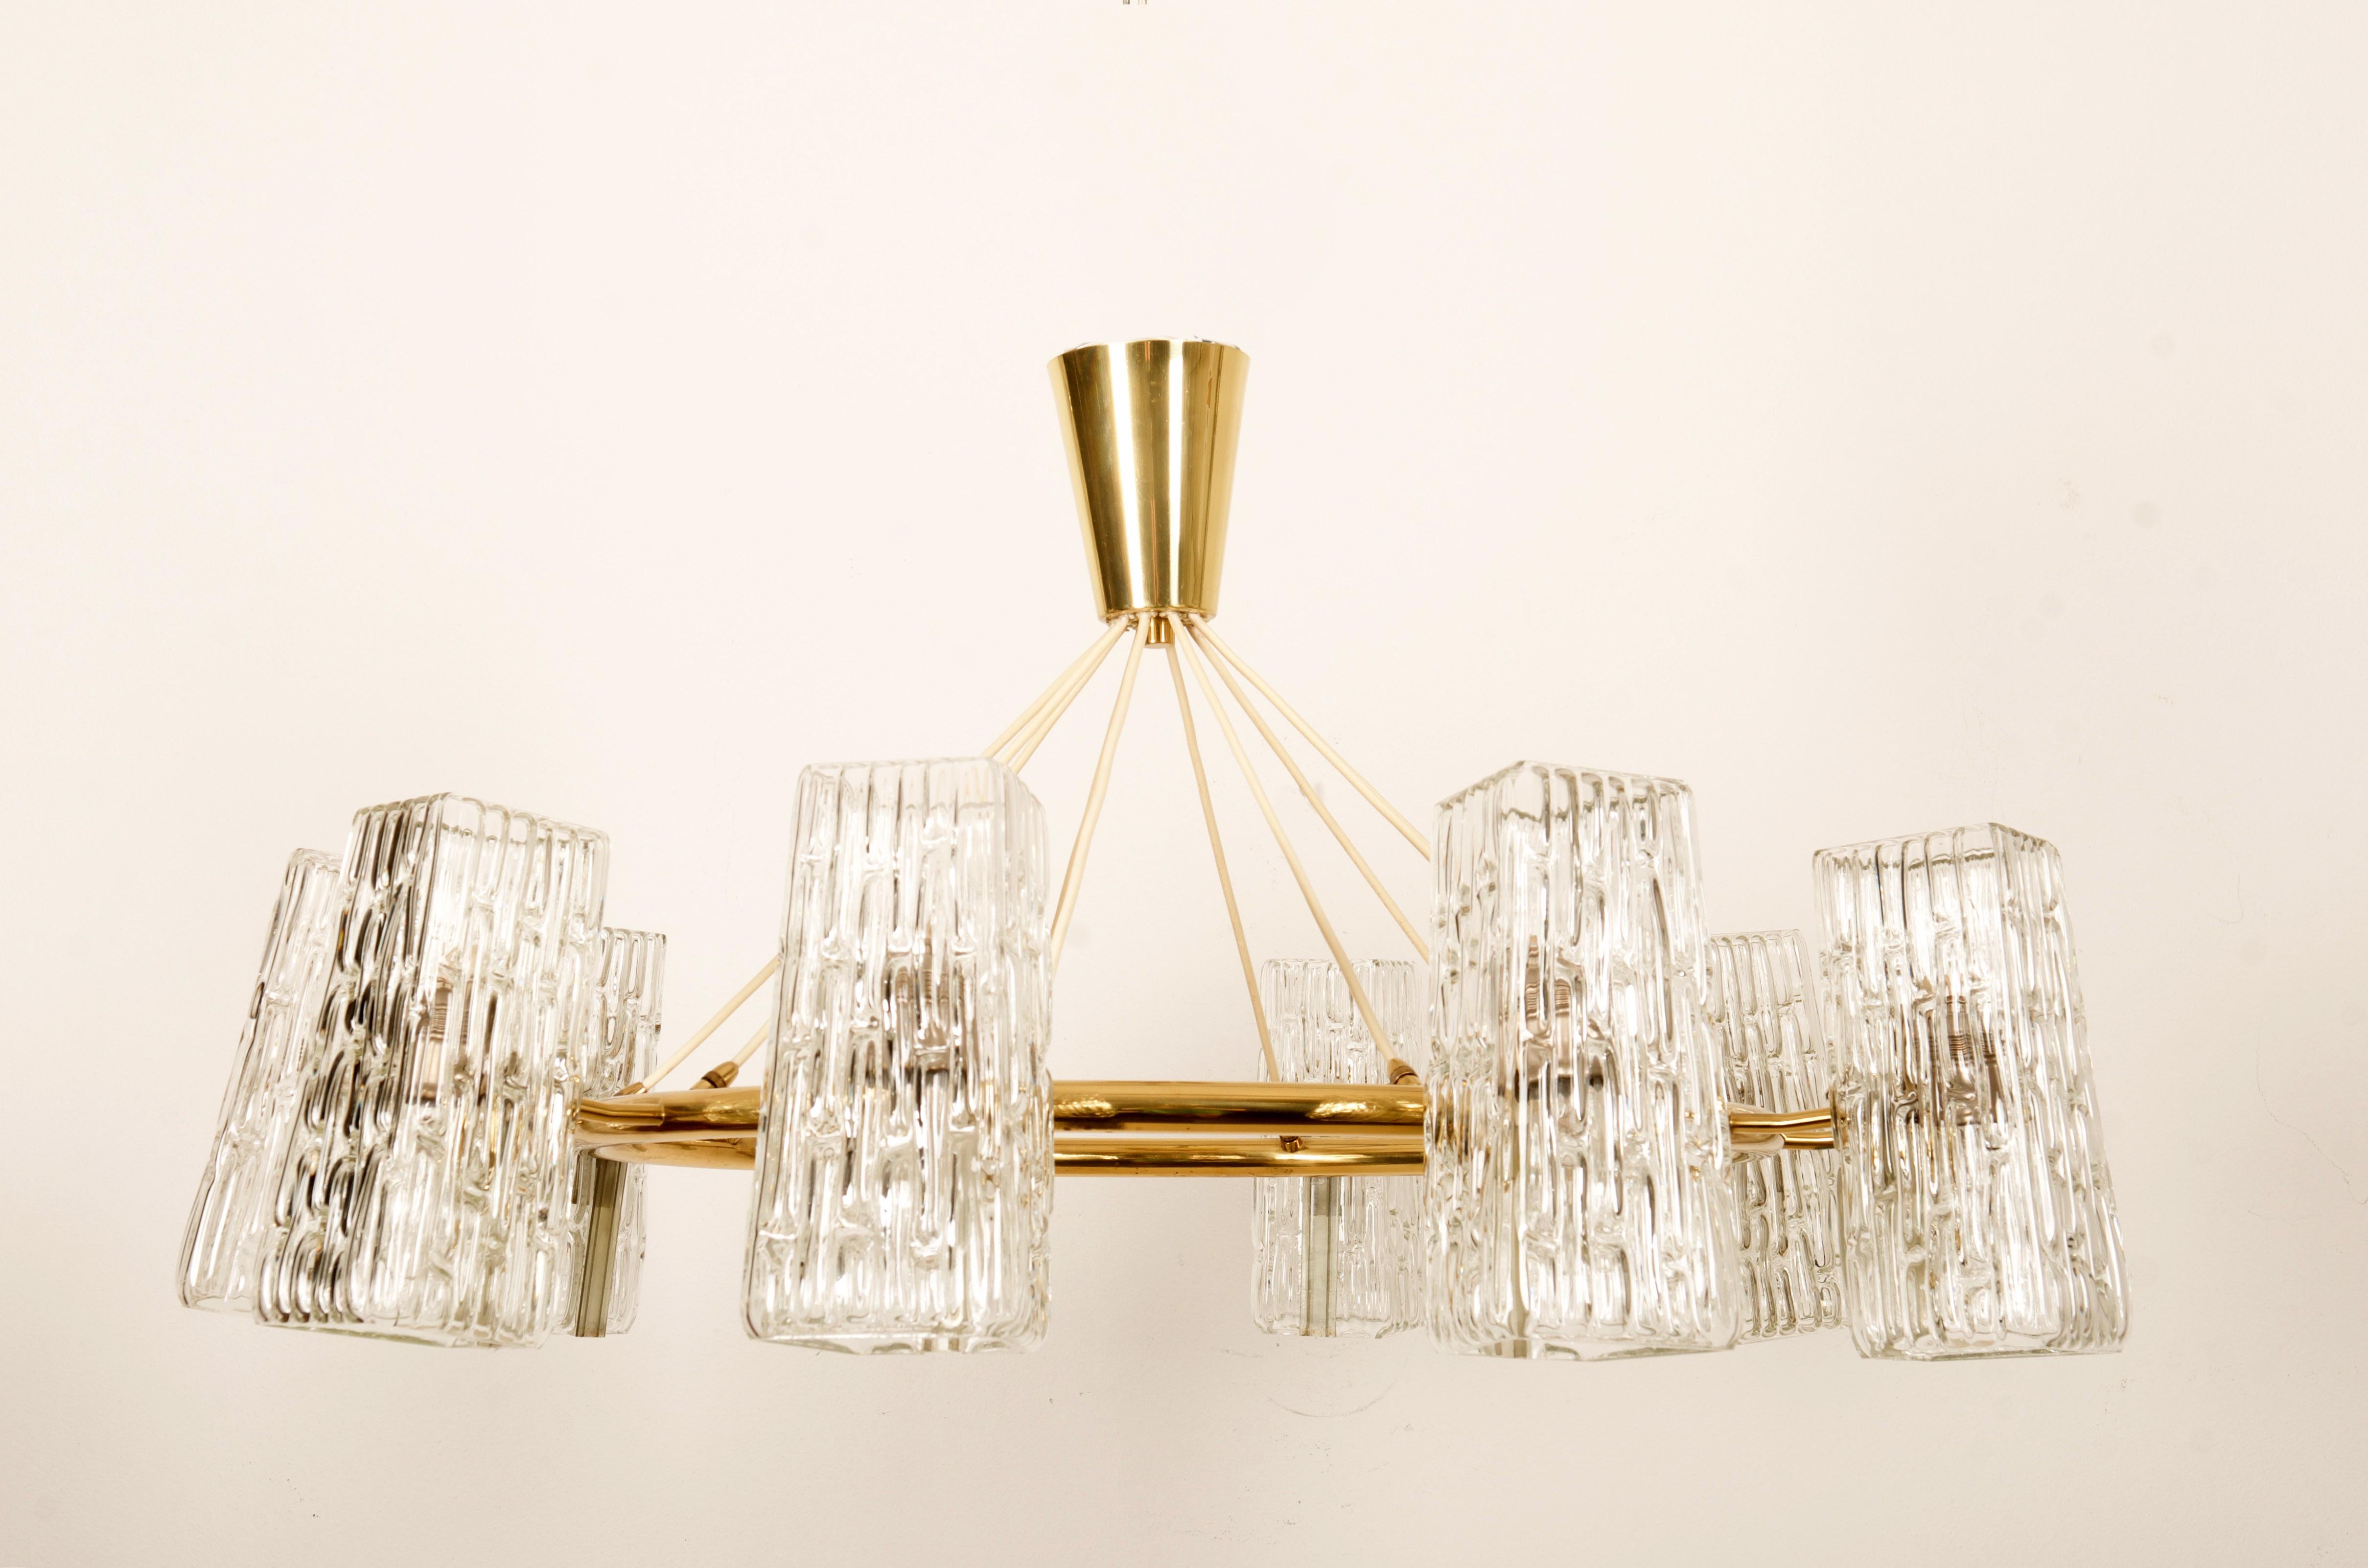 Huge Midcentury Brass Chandelier With Pressed Glass Shades By Rupert Nikoll For Sale 1